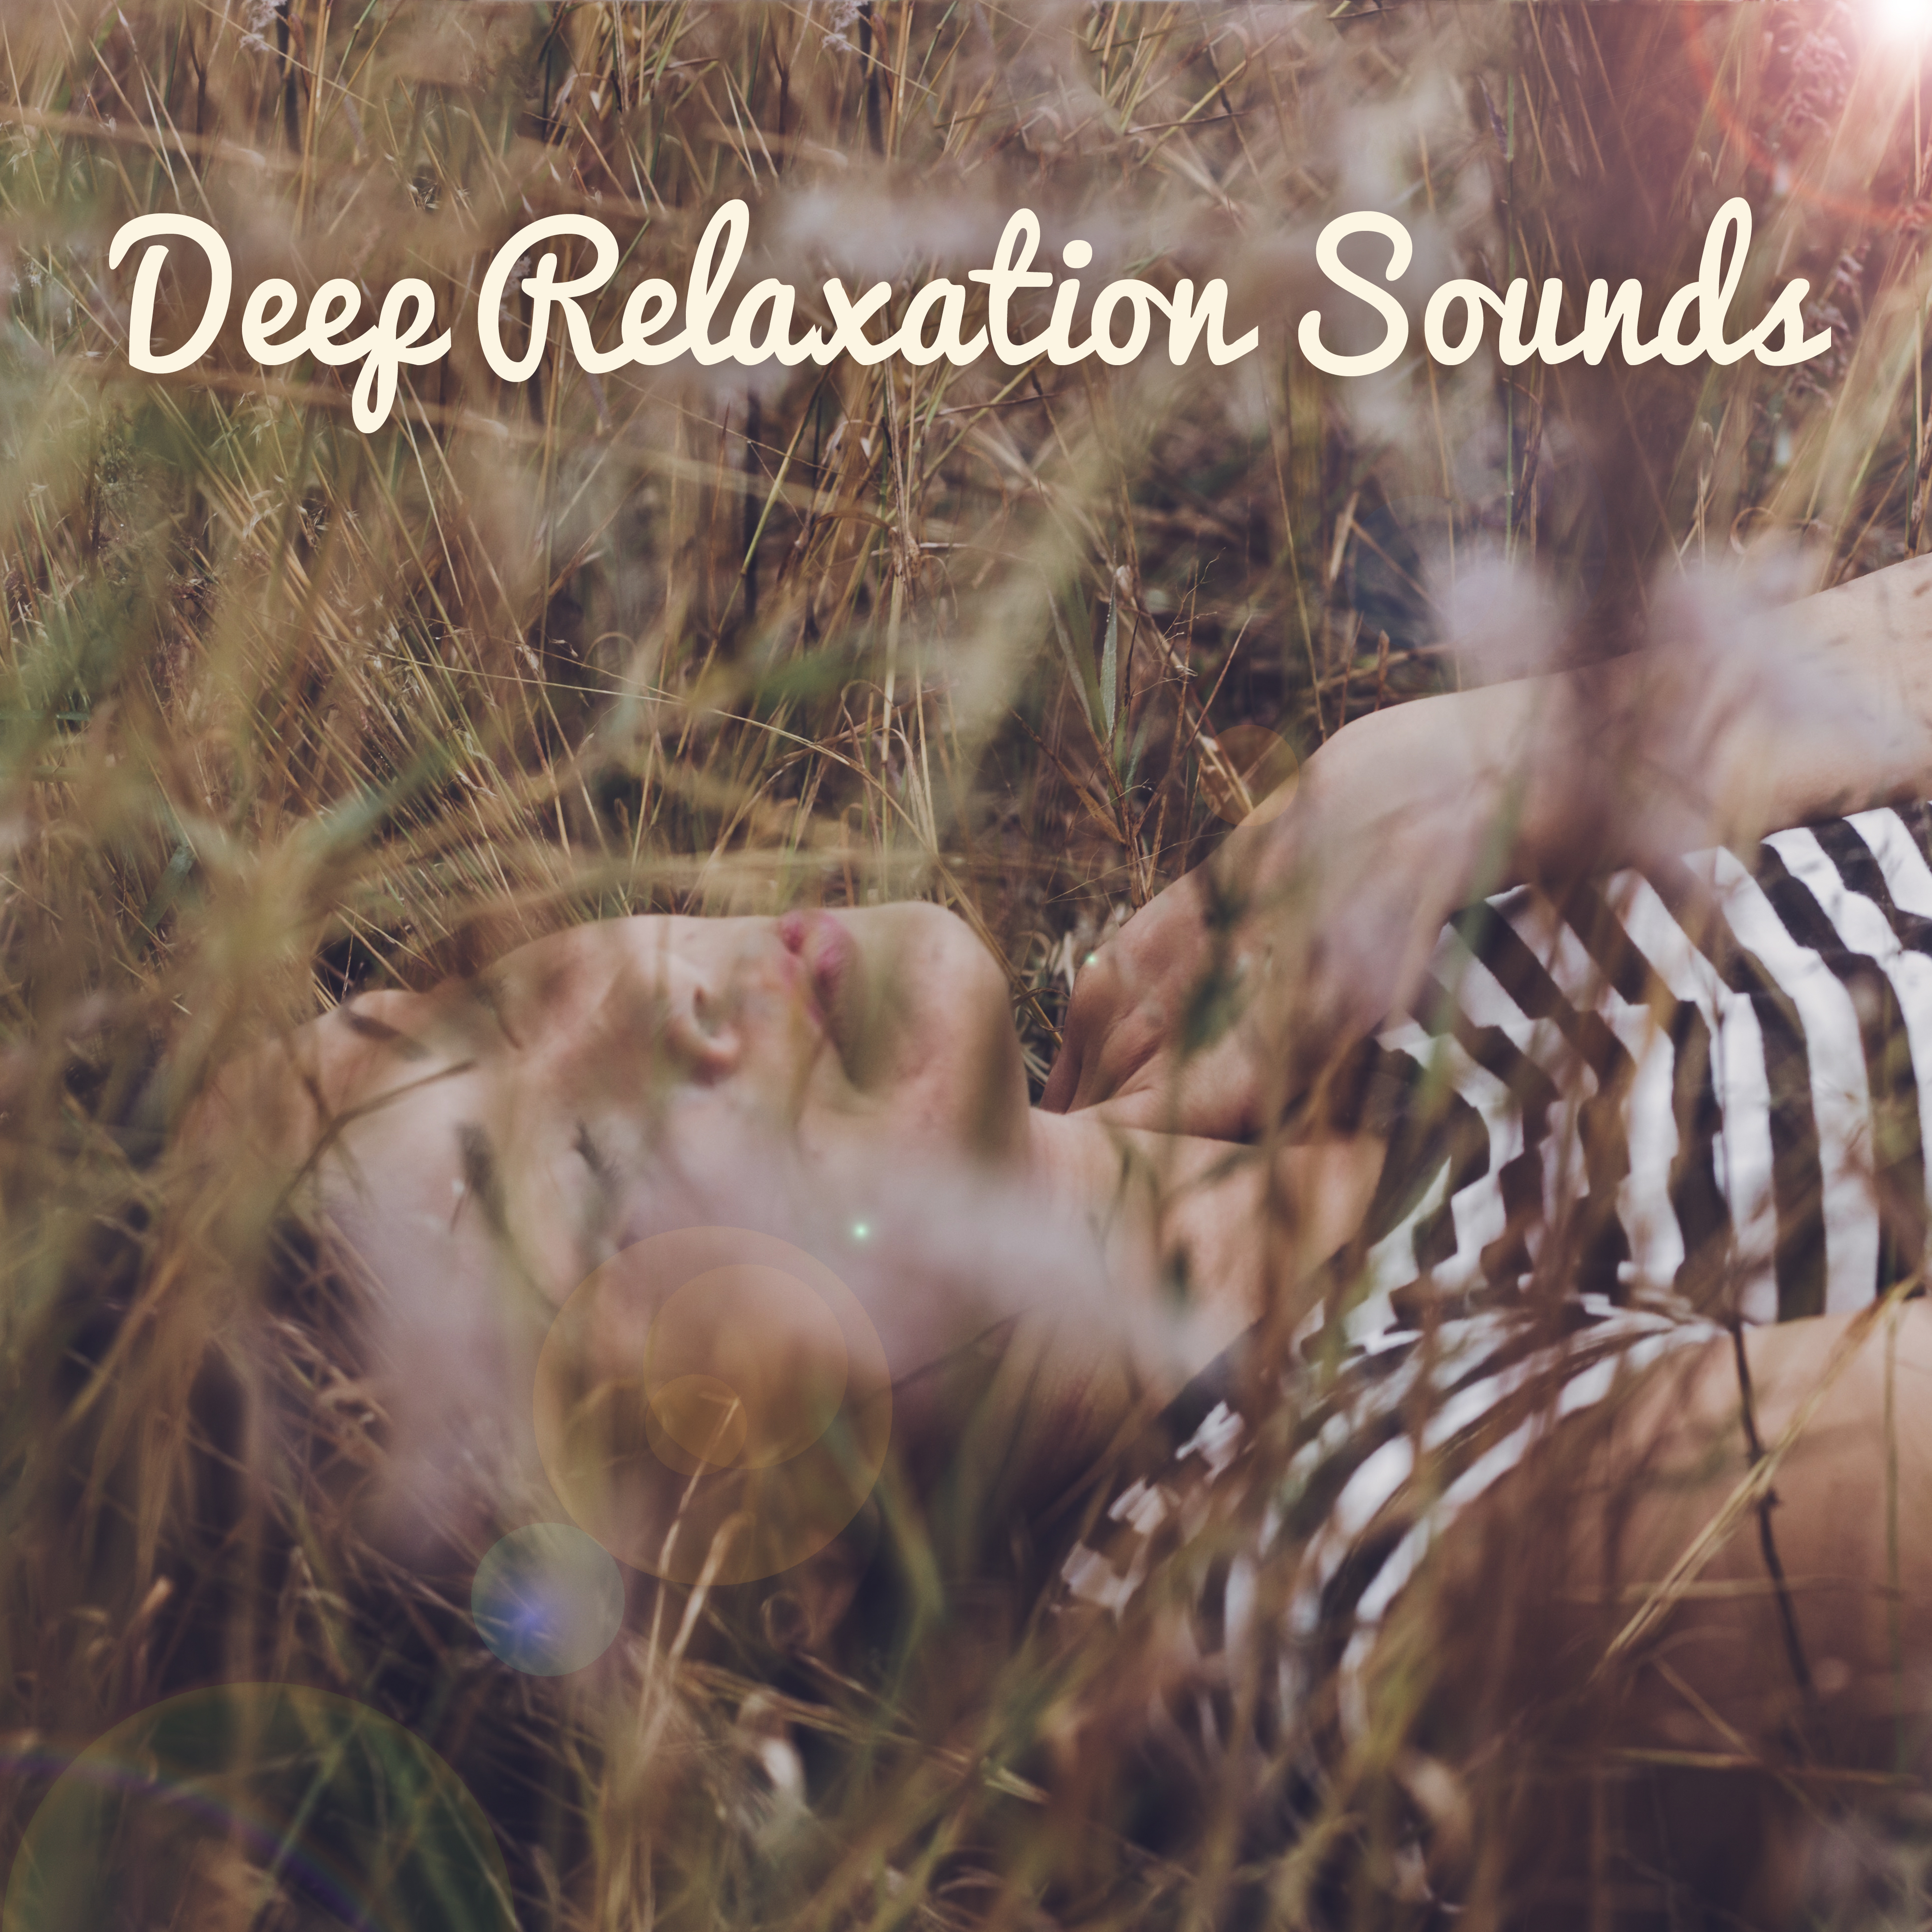 Deep Relaxation Sounds - #2018 New Age